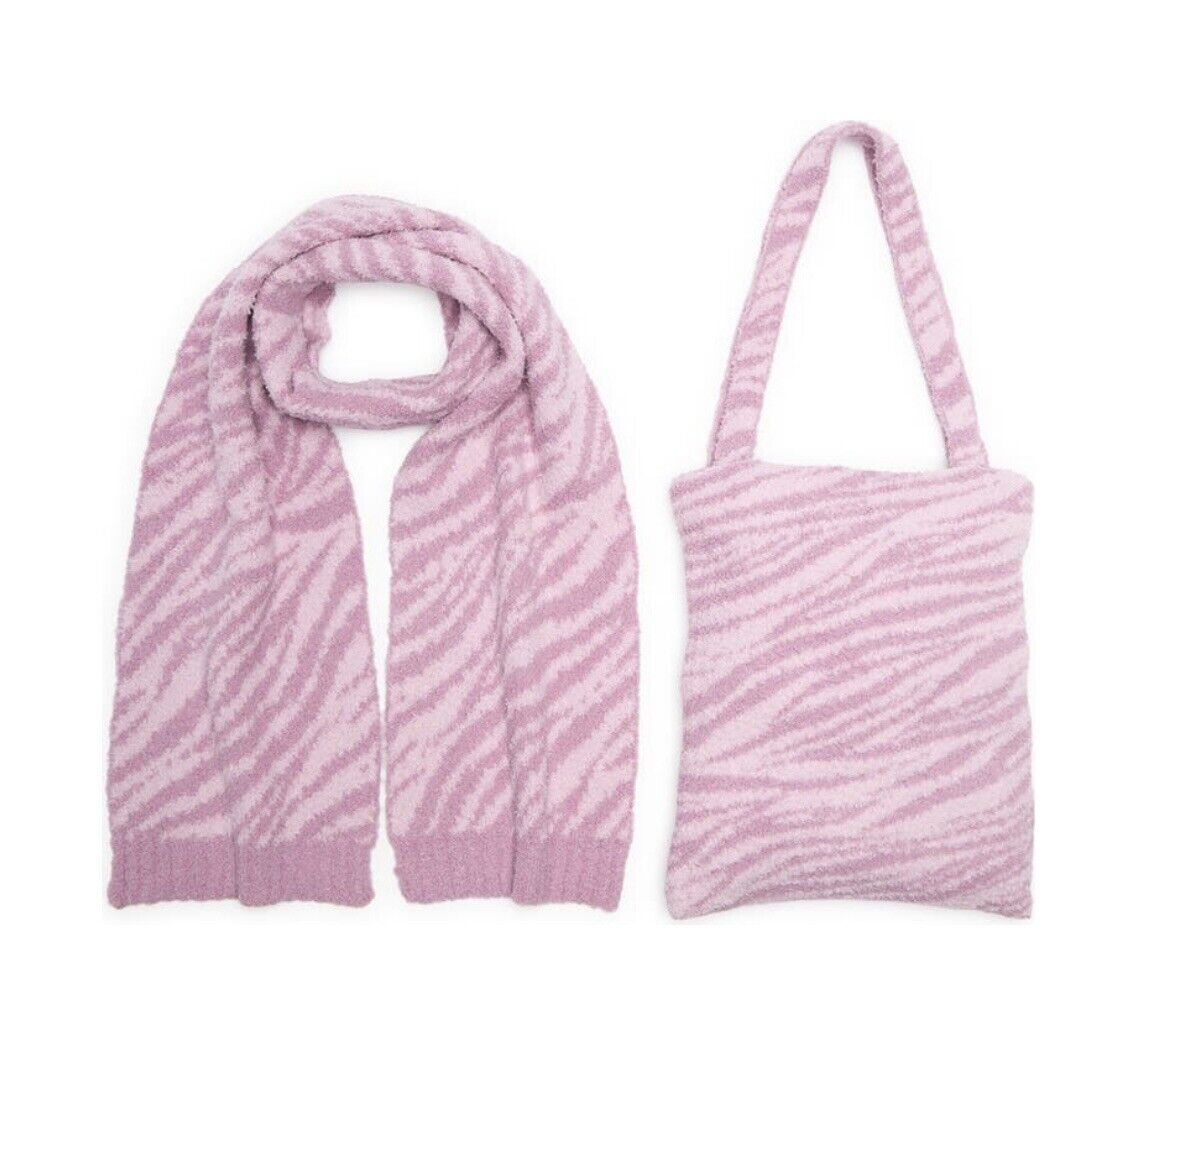 Bp Tote And Scarf Set Pink Purple Zebra Soft Fluffy